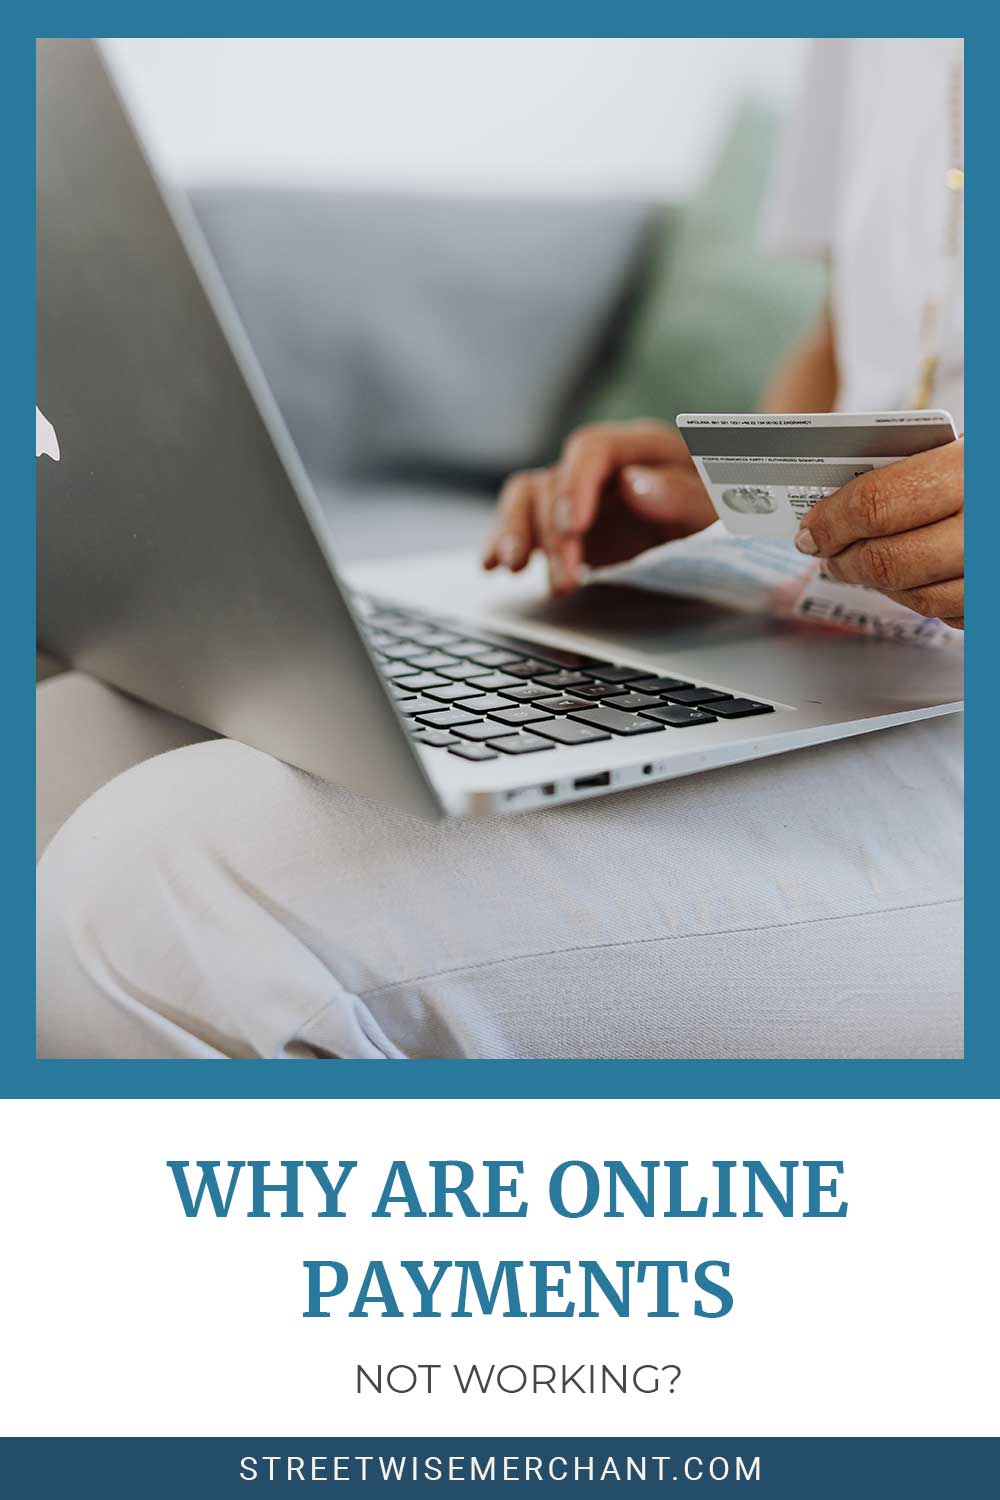 A laptop on a person's lap and a credit card in hand - Why Are Online Payments Not Working?